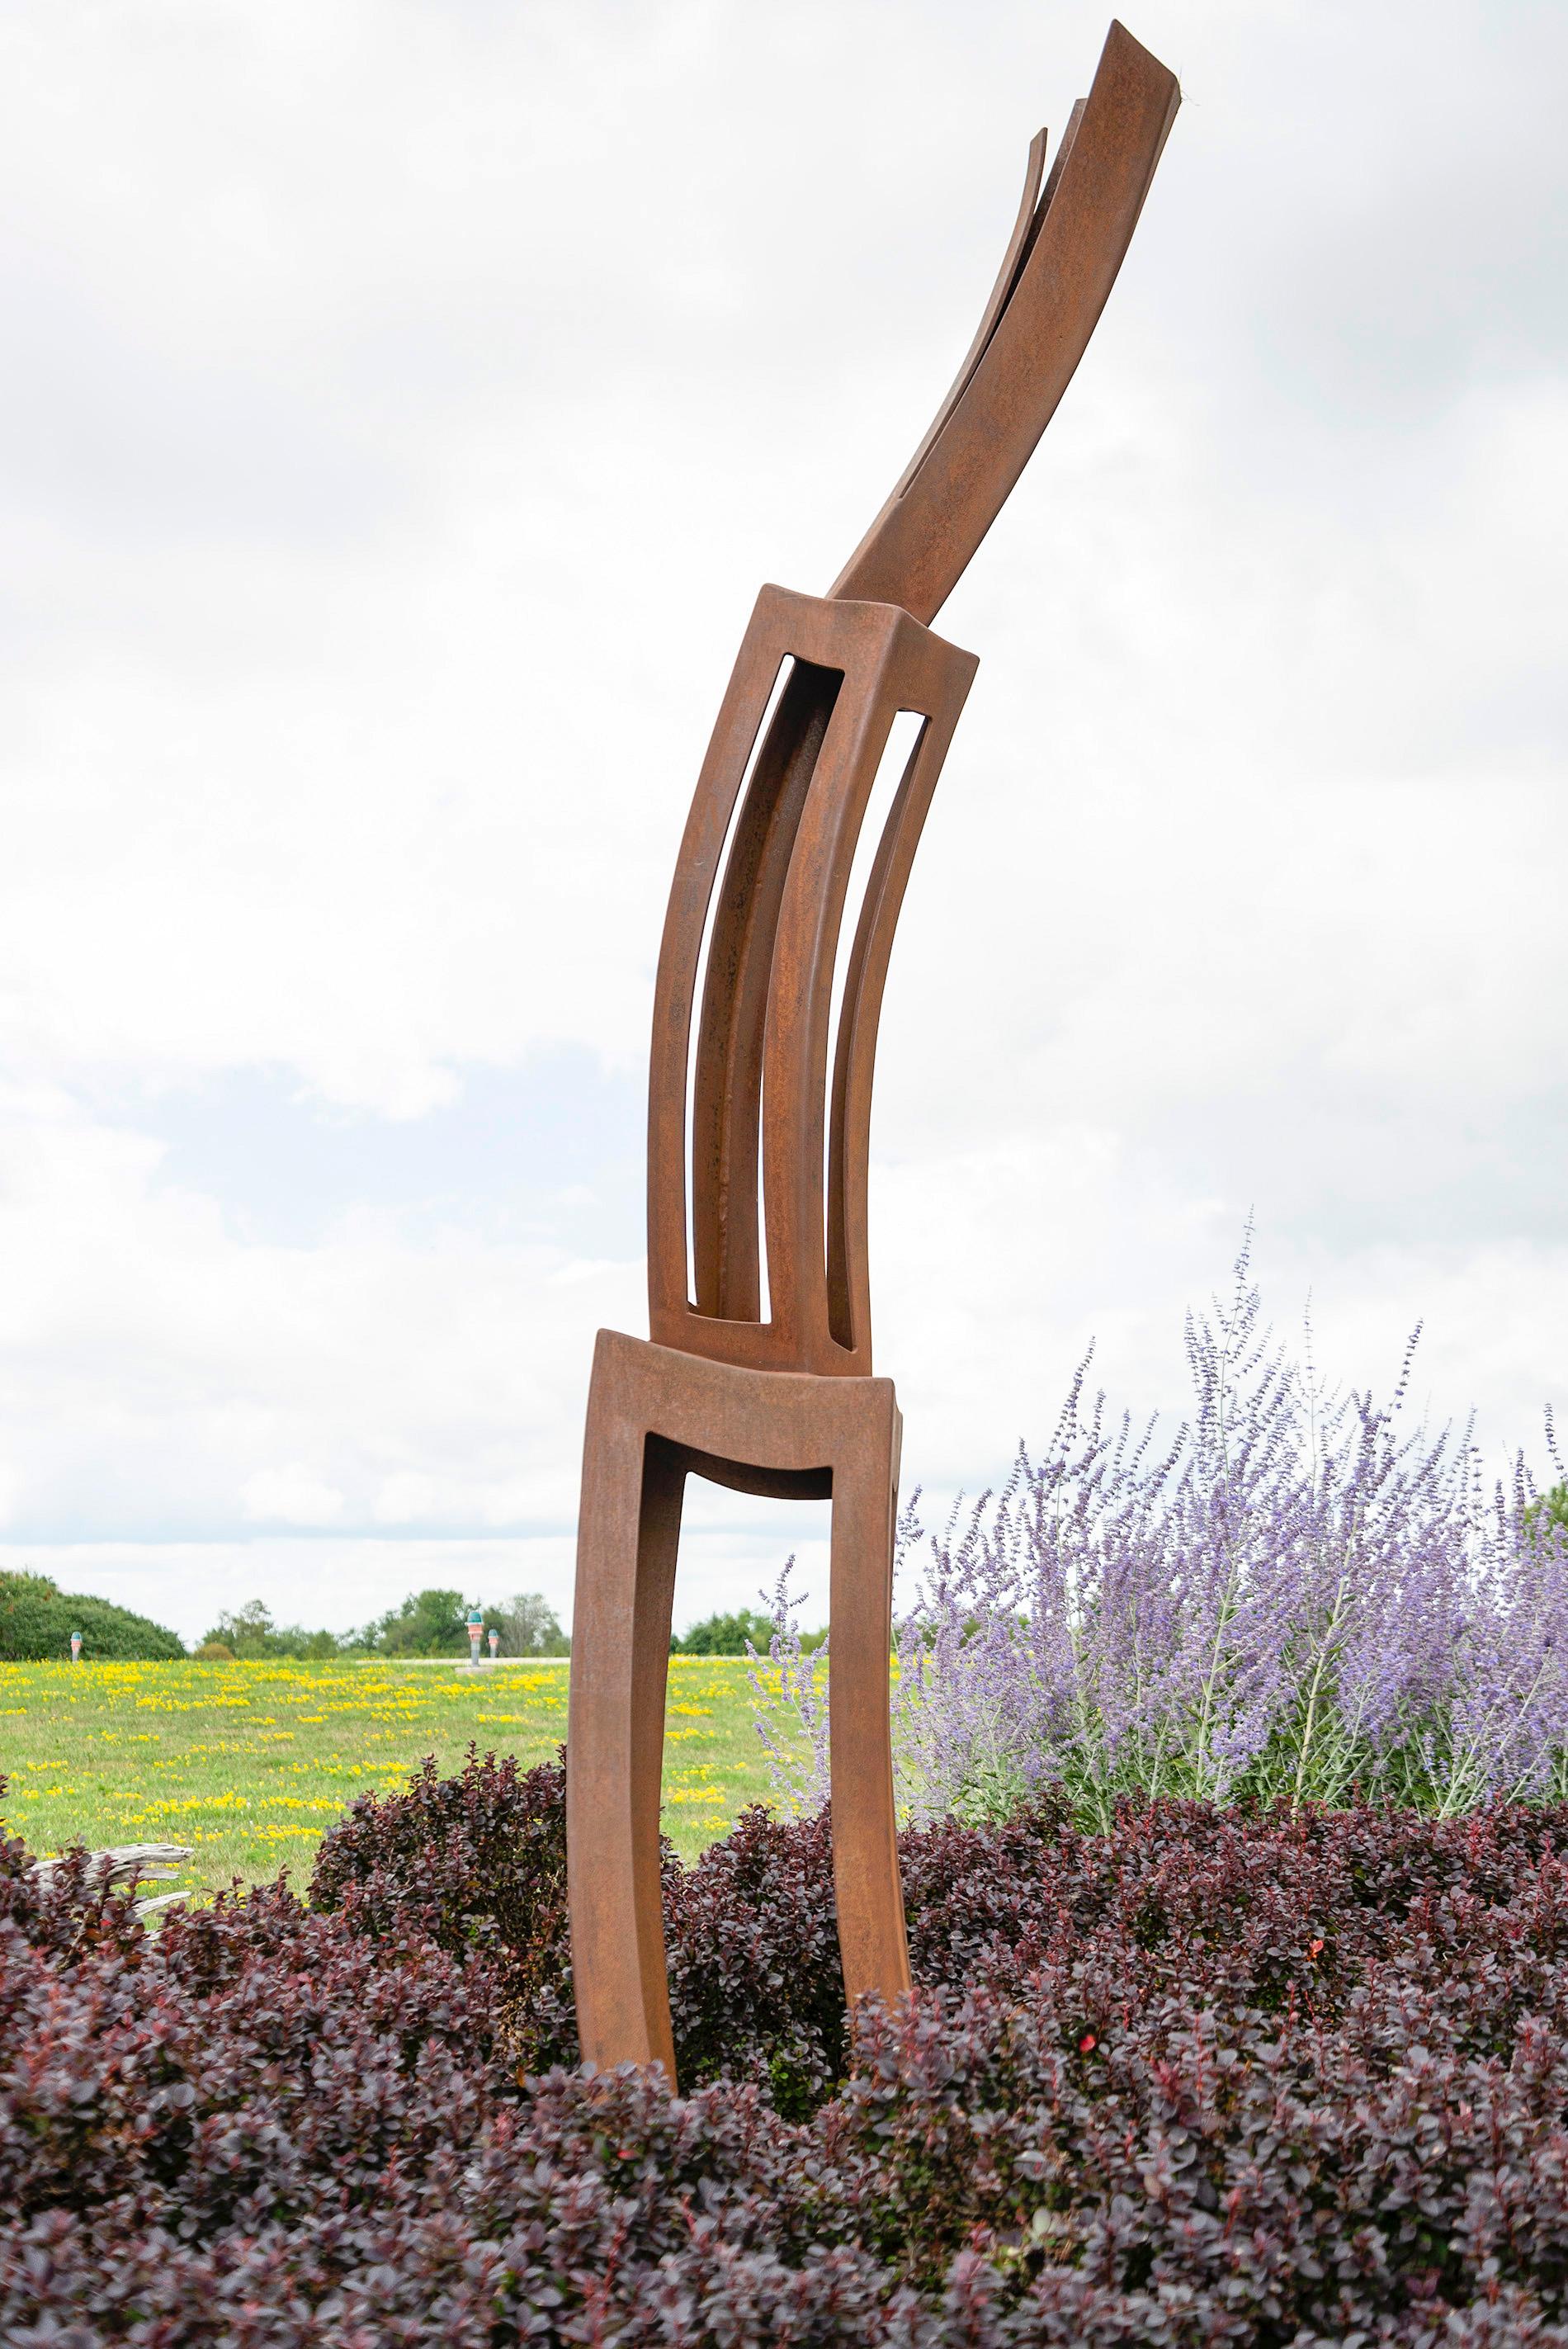 Expansion - tall, large, geometric, abstract, corten steel outdoor sculpture - Sculpture by Claude Millette